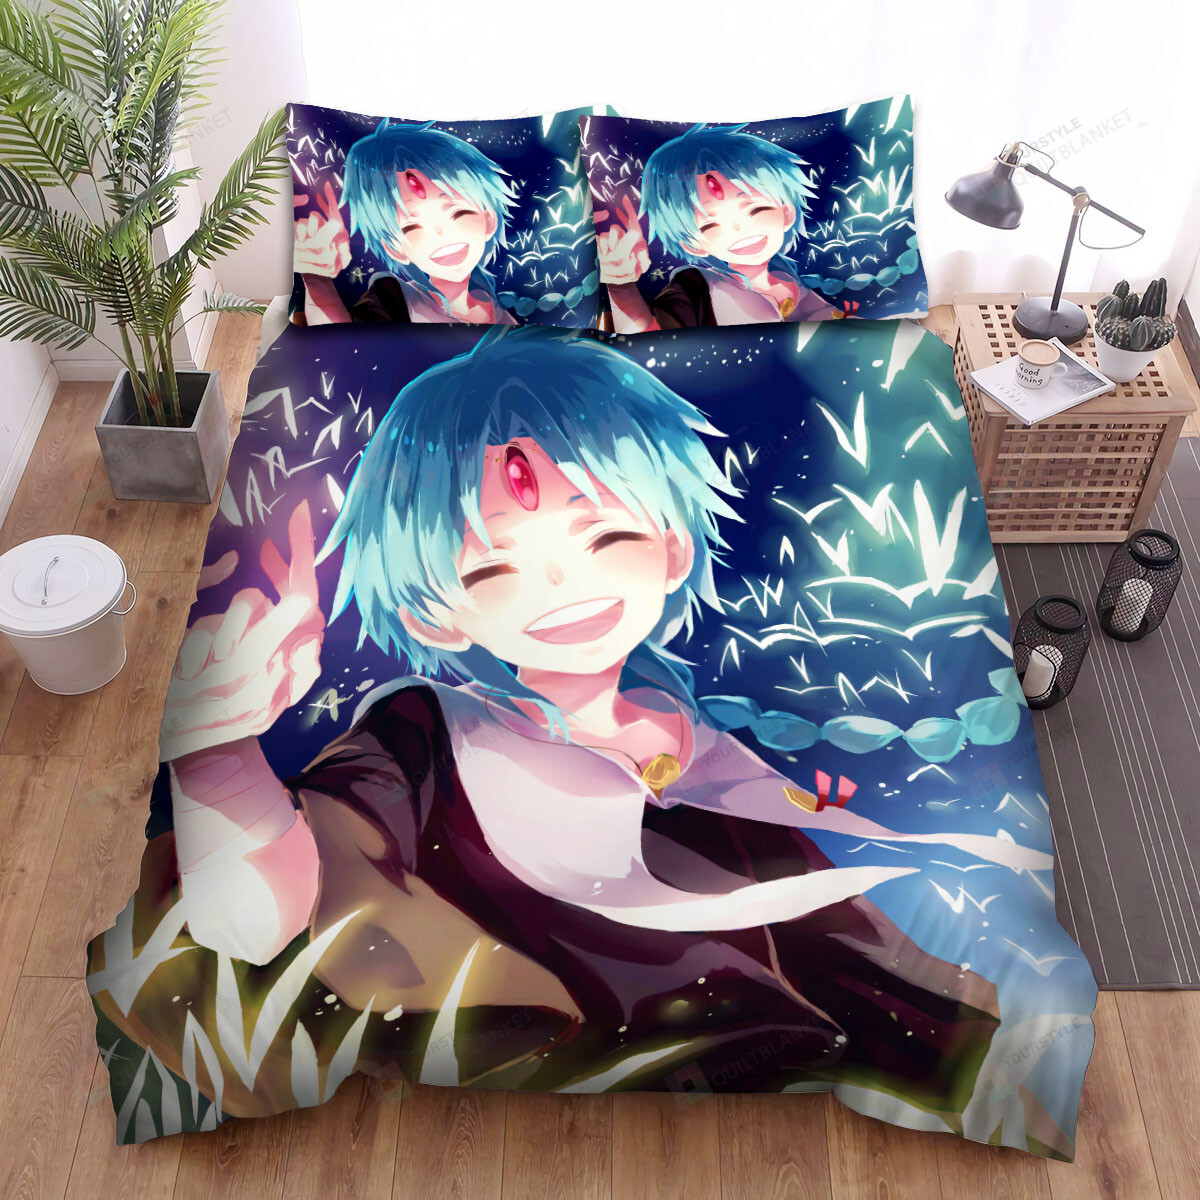 Magi The Labyrinth Of Magic Character Aladdin Bed Sheets Spread Comforter Duvet Cover Bedding Sets